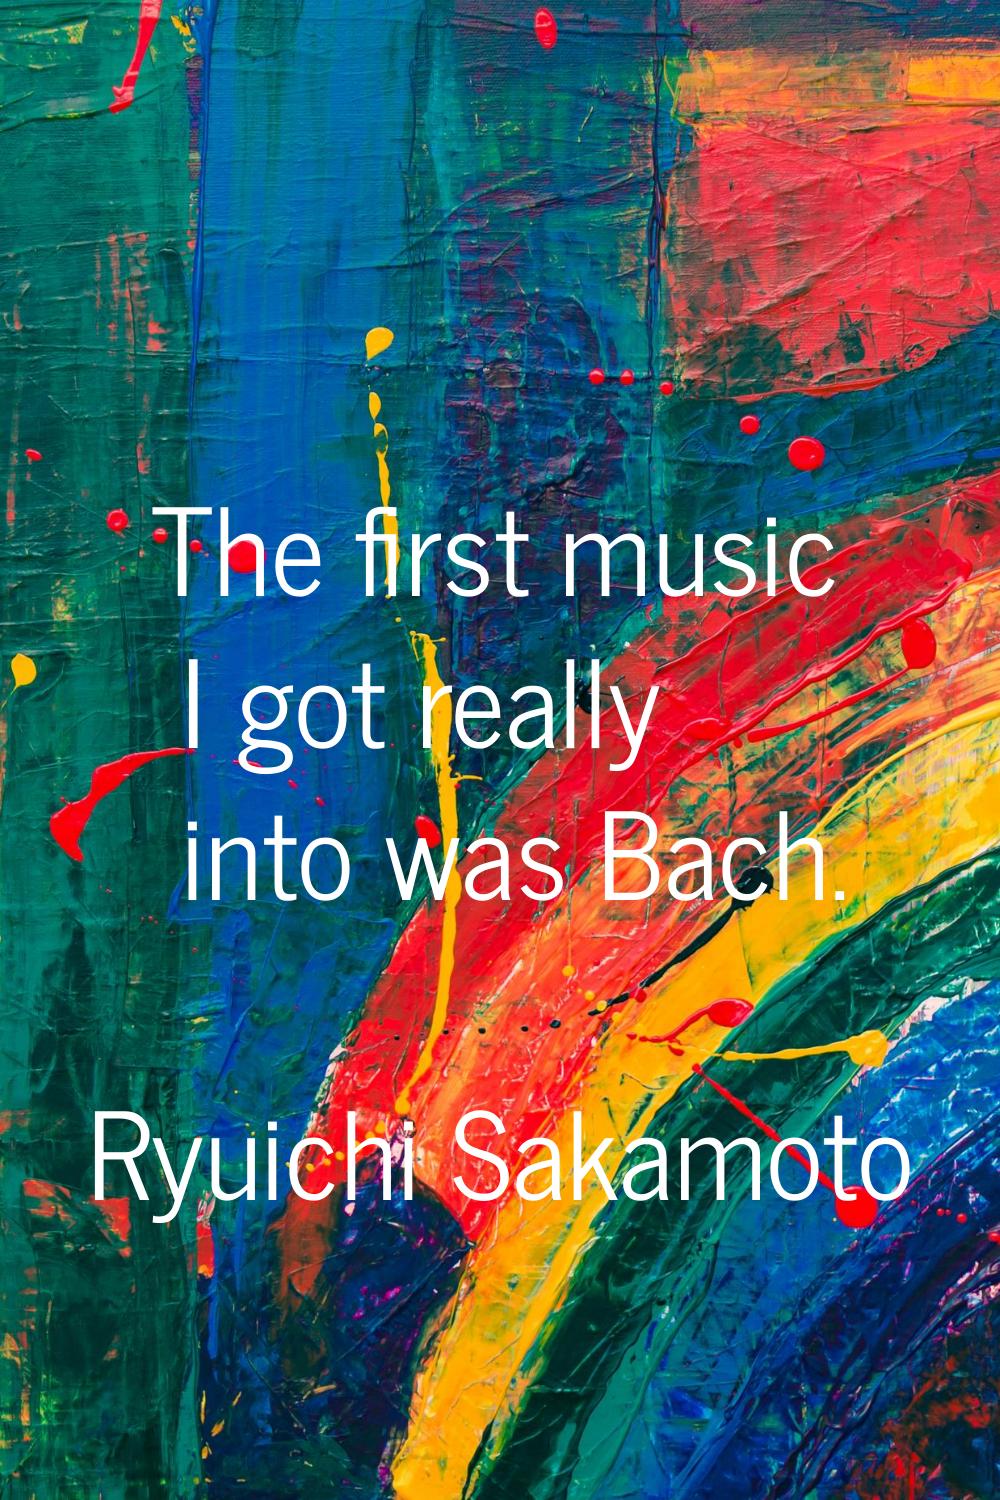 The first music I got really into was Bach.